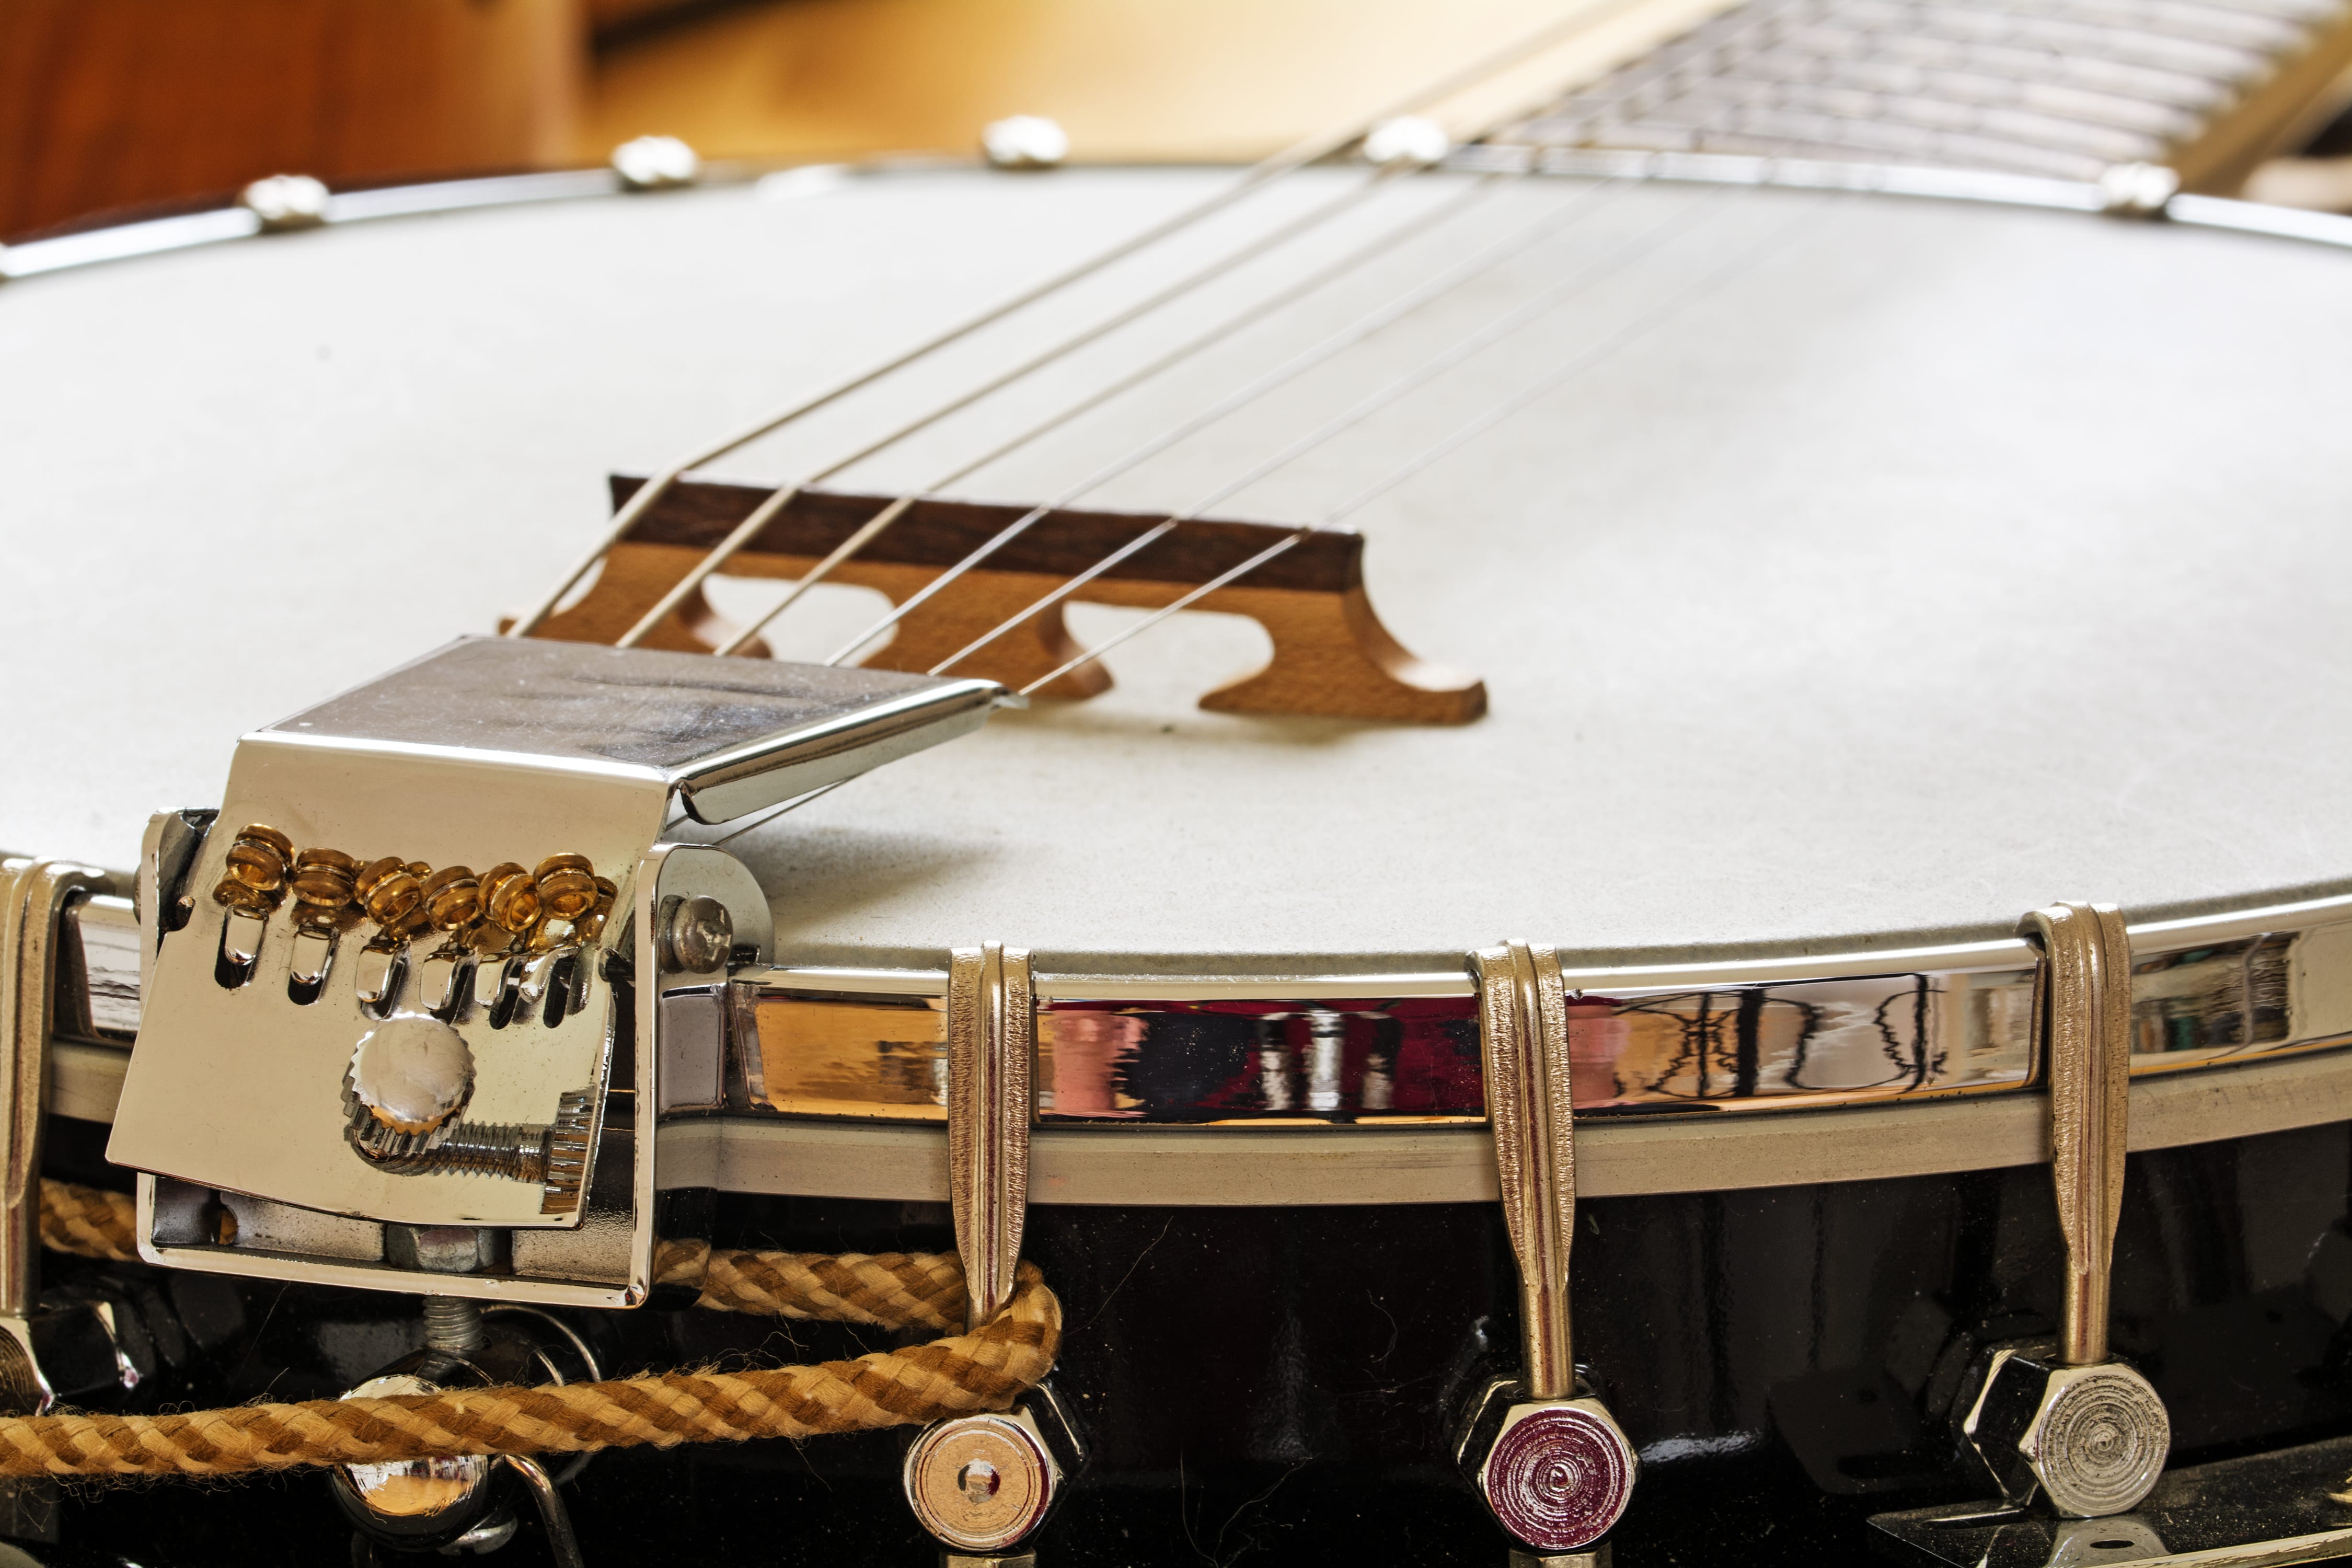 3. Placing The Strings On A 6-String Banjo